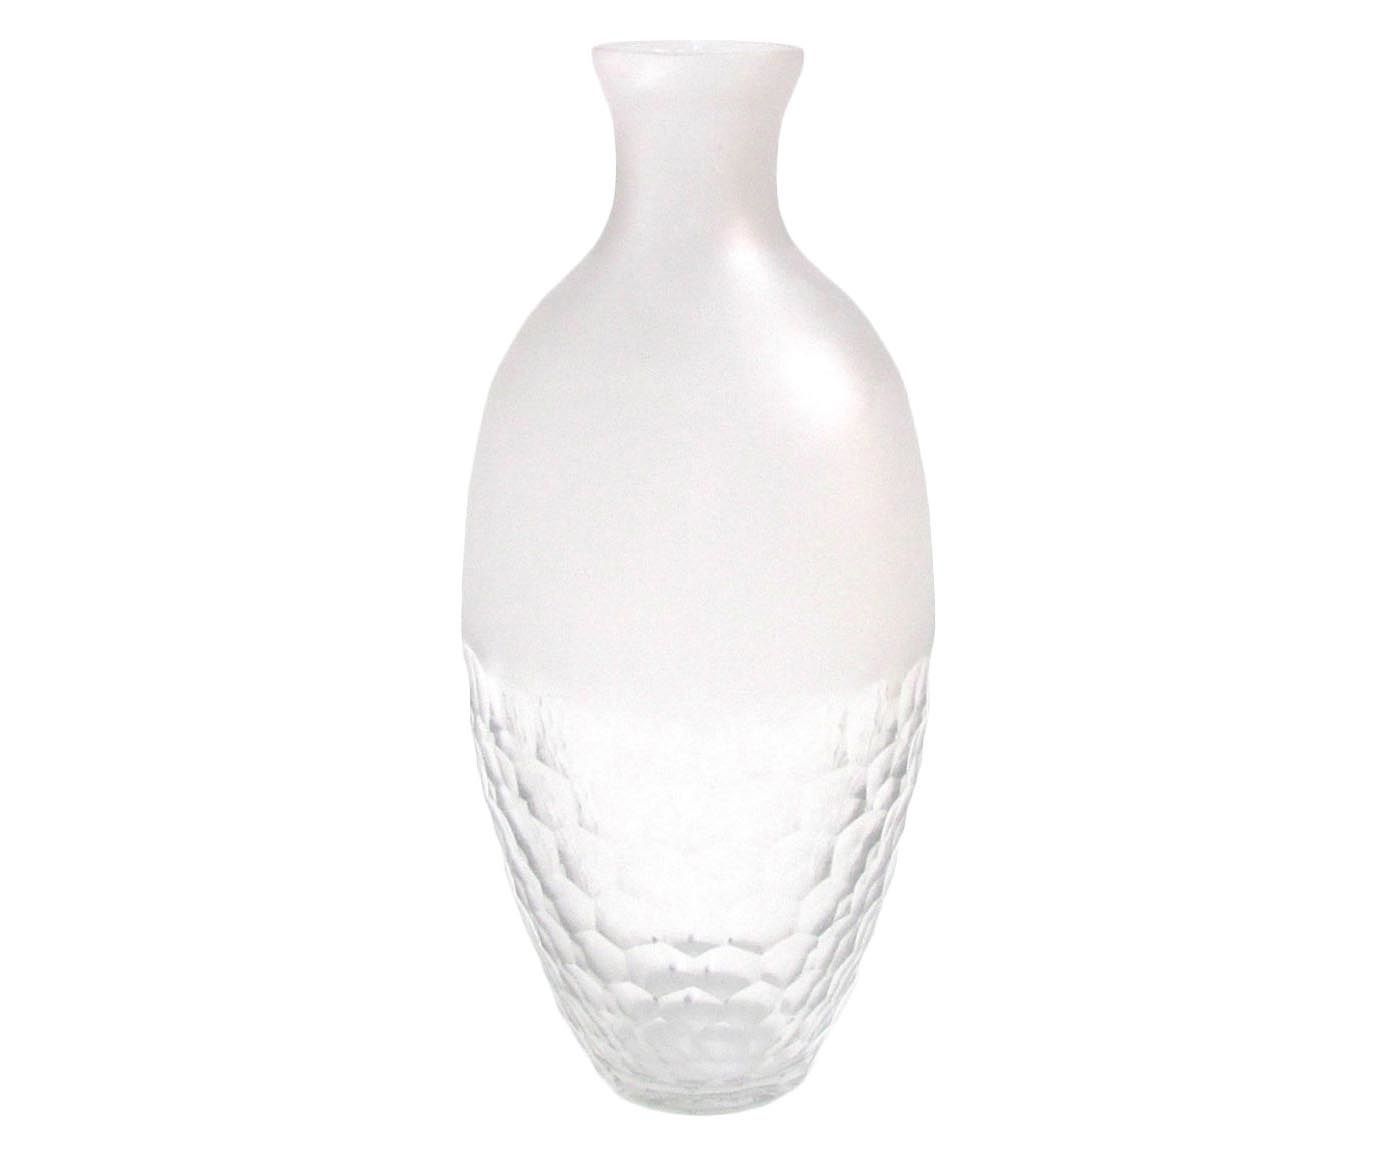 Vaso amelie clear - 30cm | Westwing.com.br